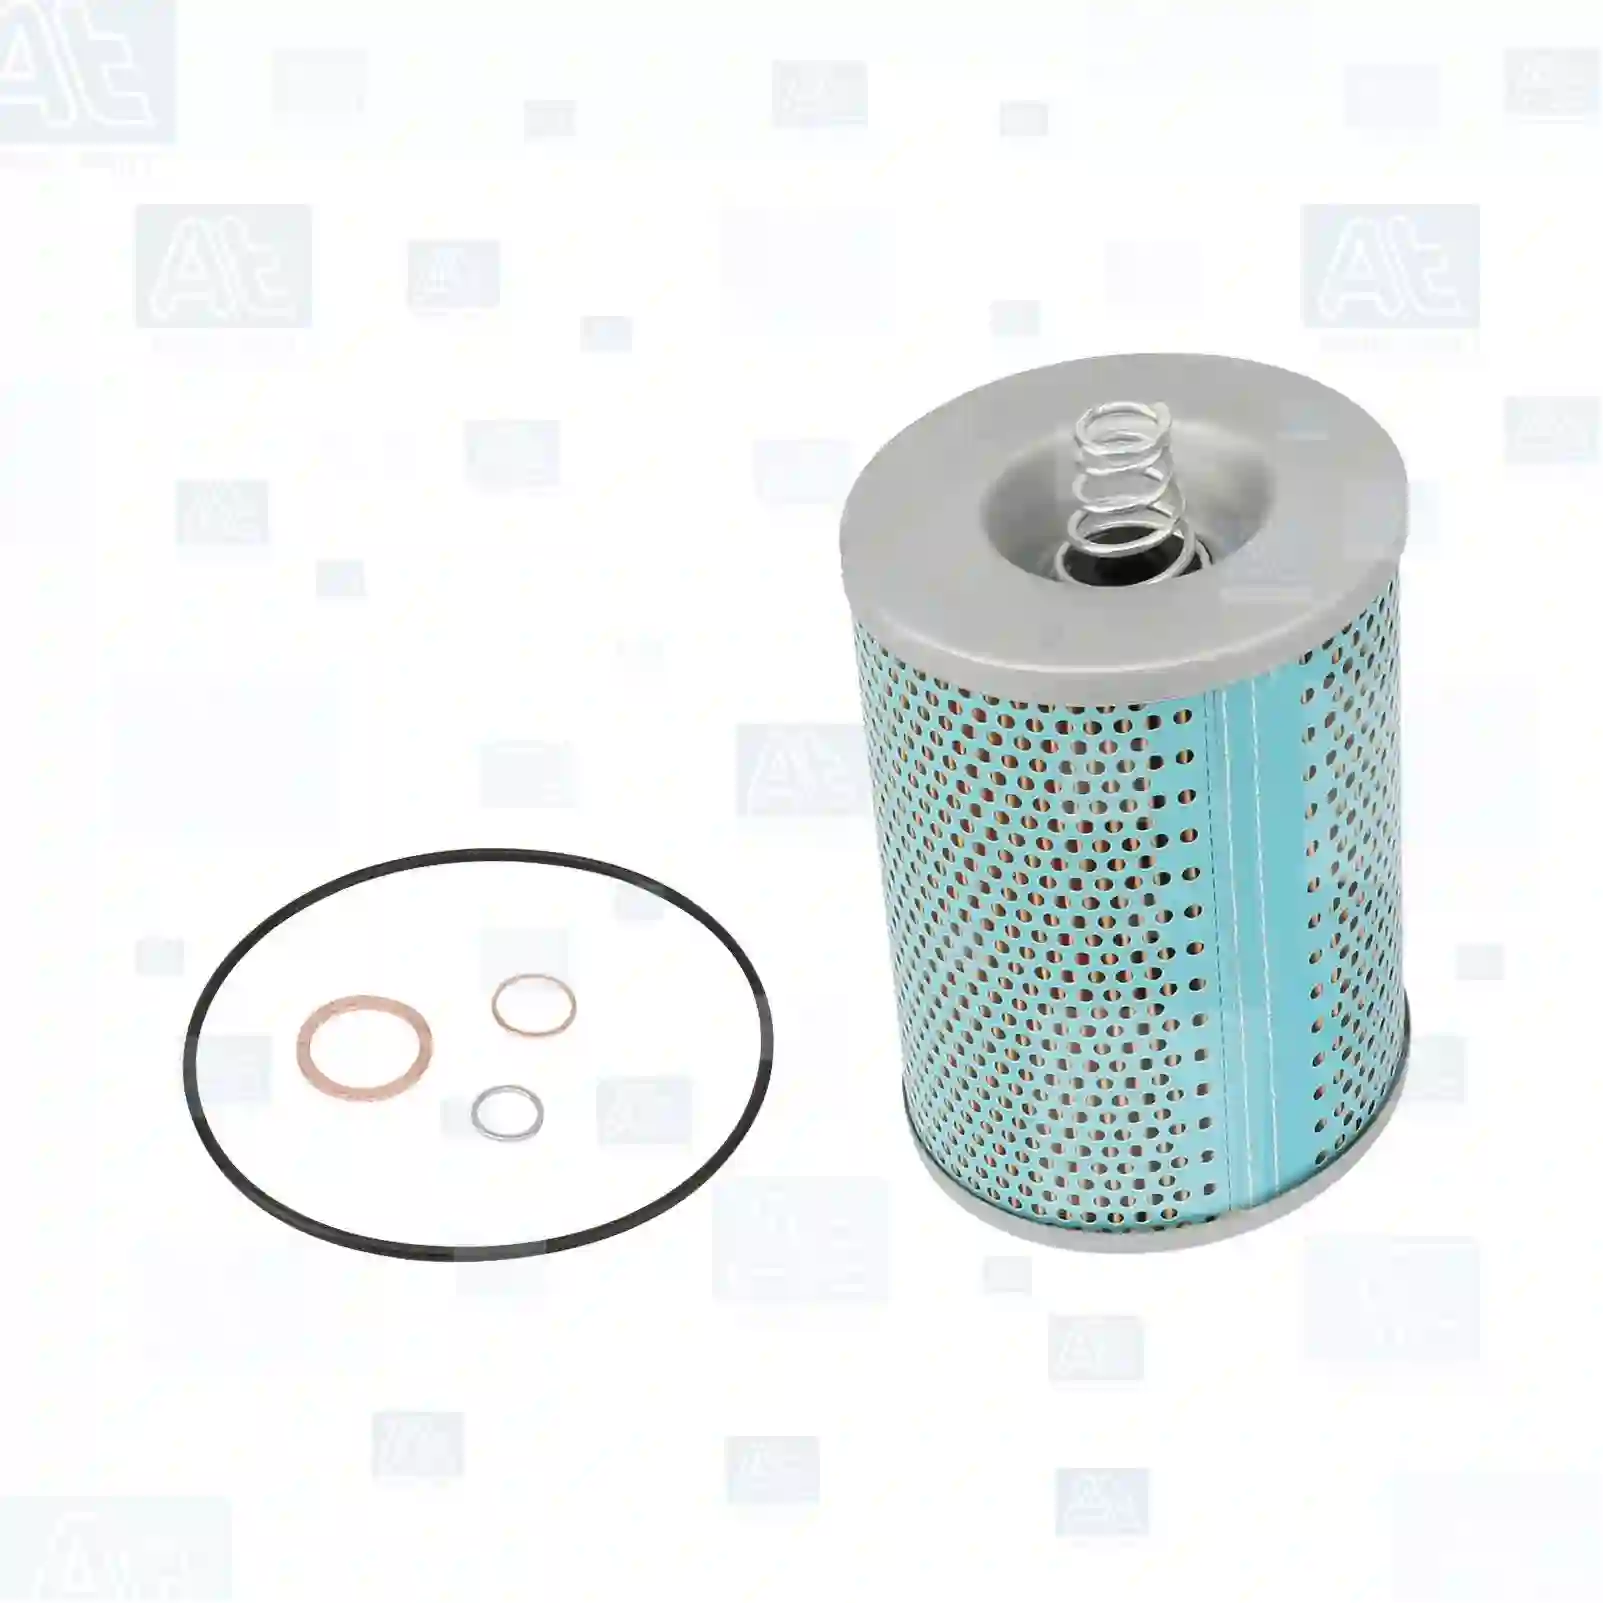 Oil filter insert, 77702565, 3621800110, 4011800009, 4011840025, 0001335290, 0001335291, ABU8548, ABU8959, 76013100, 5011427, 5011428, 7002914, 51055040028, 51055040048, 51055040049, 51055040068, 51055040084, 51055040085, 51055040086, 51055040091, 81000000239, 81055040030, 81055040038, 81055040040, N1011002592, 0001840425, 0011840125, 0011840225, 0011840425, 0011840525, 0011843725, 0352470092, 3621800110, 4011800009, 4011800025, 4011840025, 5000242510, 5001846630, 6005019816, LU8009, 8311999137, 8319000110 ||  77702565 At Spare Part | Engine, Accelerator Pedal, Camshaft, Connecting Rod, Crankcase, Crankshaft, Cylinder Head, Engine Suspension Mountings, Exhaust Manifold, Exhaust Gas Recirculation, Filter Kits, Flywheel Housing, General Overhaul Kits, Engine, Intake Manifold, Oil Cleaner, Oil Cooler, Oil Filter, Oil Pump, Oil Sump, Piston & Liner, Sensor & Switch, Timing Case, Turbocharger, Cooling System, Belt Tensioner, Coolant Filter, Coolant Pipe, Corrosion Prevention Agent, Drive, Expansion Tank, Fan, Intercooler, Monitors & Gauges, Radiator, Thermostat, V-Belt / Timing belt, Water Pump, Fuel System, Electronical Injector Unit, Feed Pump, Fuel Filter, cpl., Fuel Gauge Sender,  Fuel Line, Fuel Pump, Fuel Tank, Injection Line Kit, Injection Pump, Exhaust System, Clutch & Pedal, Gearbox, Propeller Shaft, Axles, Brake System, Hubs & Wheels, Suspension, Leaf Spring, Universal Parts / Accessories, Steering, Electrical System, Cabin Oil filter insert, 77702565, 3621800110, 4011800009, 4011840025, 0001335290, 0001335291, ABU8548, ABU8959, 76013100, 5011427, 5011428, 7002914, 51055040028, 51055040048, 51055040049, 51055040068, 51055040084, 51055040085, 51055040086, 51055040091, 81000000239, 81055040030, 81055040038, 81055040040, N1011002592, 0001840425, 0011840125, 0011840225, 0011840425, 0011840525, 0011843725, 0352470092, 3621800110, 4011800009, 4011800025, 4011840025, 5000242510, 5001846630, 6005019816, LU8009, 8311999137, 8319000110 ||  77702565 At Spare Part | Engine, Accelerator Pedal, Camshaft, Connecting Rod, Crankcase, Crankshaft, Cylinder Head, Engine Suspension Mountings, Exhaust Manifold, Exhaust Gas Recirculation, Filter Kits, Flywheel Housing, General Overhaul Kits, Engine, Intake Manifold, Oil Cleaner, Oil Cooler, Oil Filter, Oil Pump, Oil Sump, Piston & Liner, Sensor & Switch, Timing Case, Turbocharger, Cooling System, Belt Tensioner, Coolant Filter, Coolant Pipe, Corrosion Prevention Agent, Drive, Expansion Tank, Fan, Intercooler, Monitors & Gauges, Radiator, Thermostat, V-Belt / Timing belt, Water Pump, Fuel System, Electronical Injector Unit, Feed Pump, Fuel Filter, cpl., Fuel Gauge Sender,  Fuel Line, Fuel Pump, Fuel Tank, Injection Line Kit, Injection Pump, Exhaust System, Clutch & Pedal, Gearbox, Propeller Shaft, Axles, Brake System, Hubs & Wheels, Suspension, Leaf Spring, Universal Parts / Accessories, Steering, Electrical System, Cabin